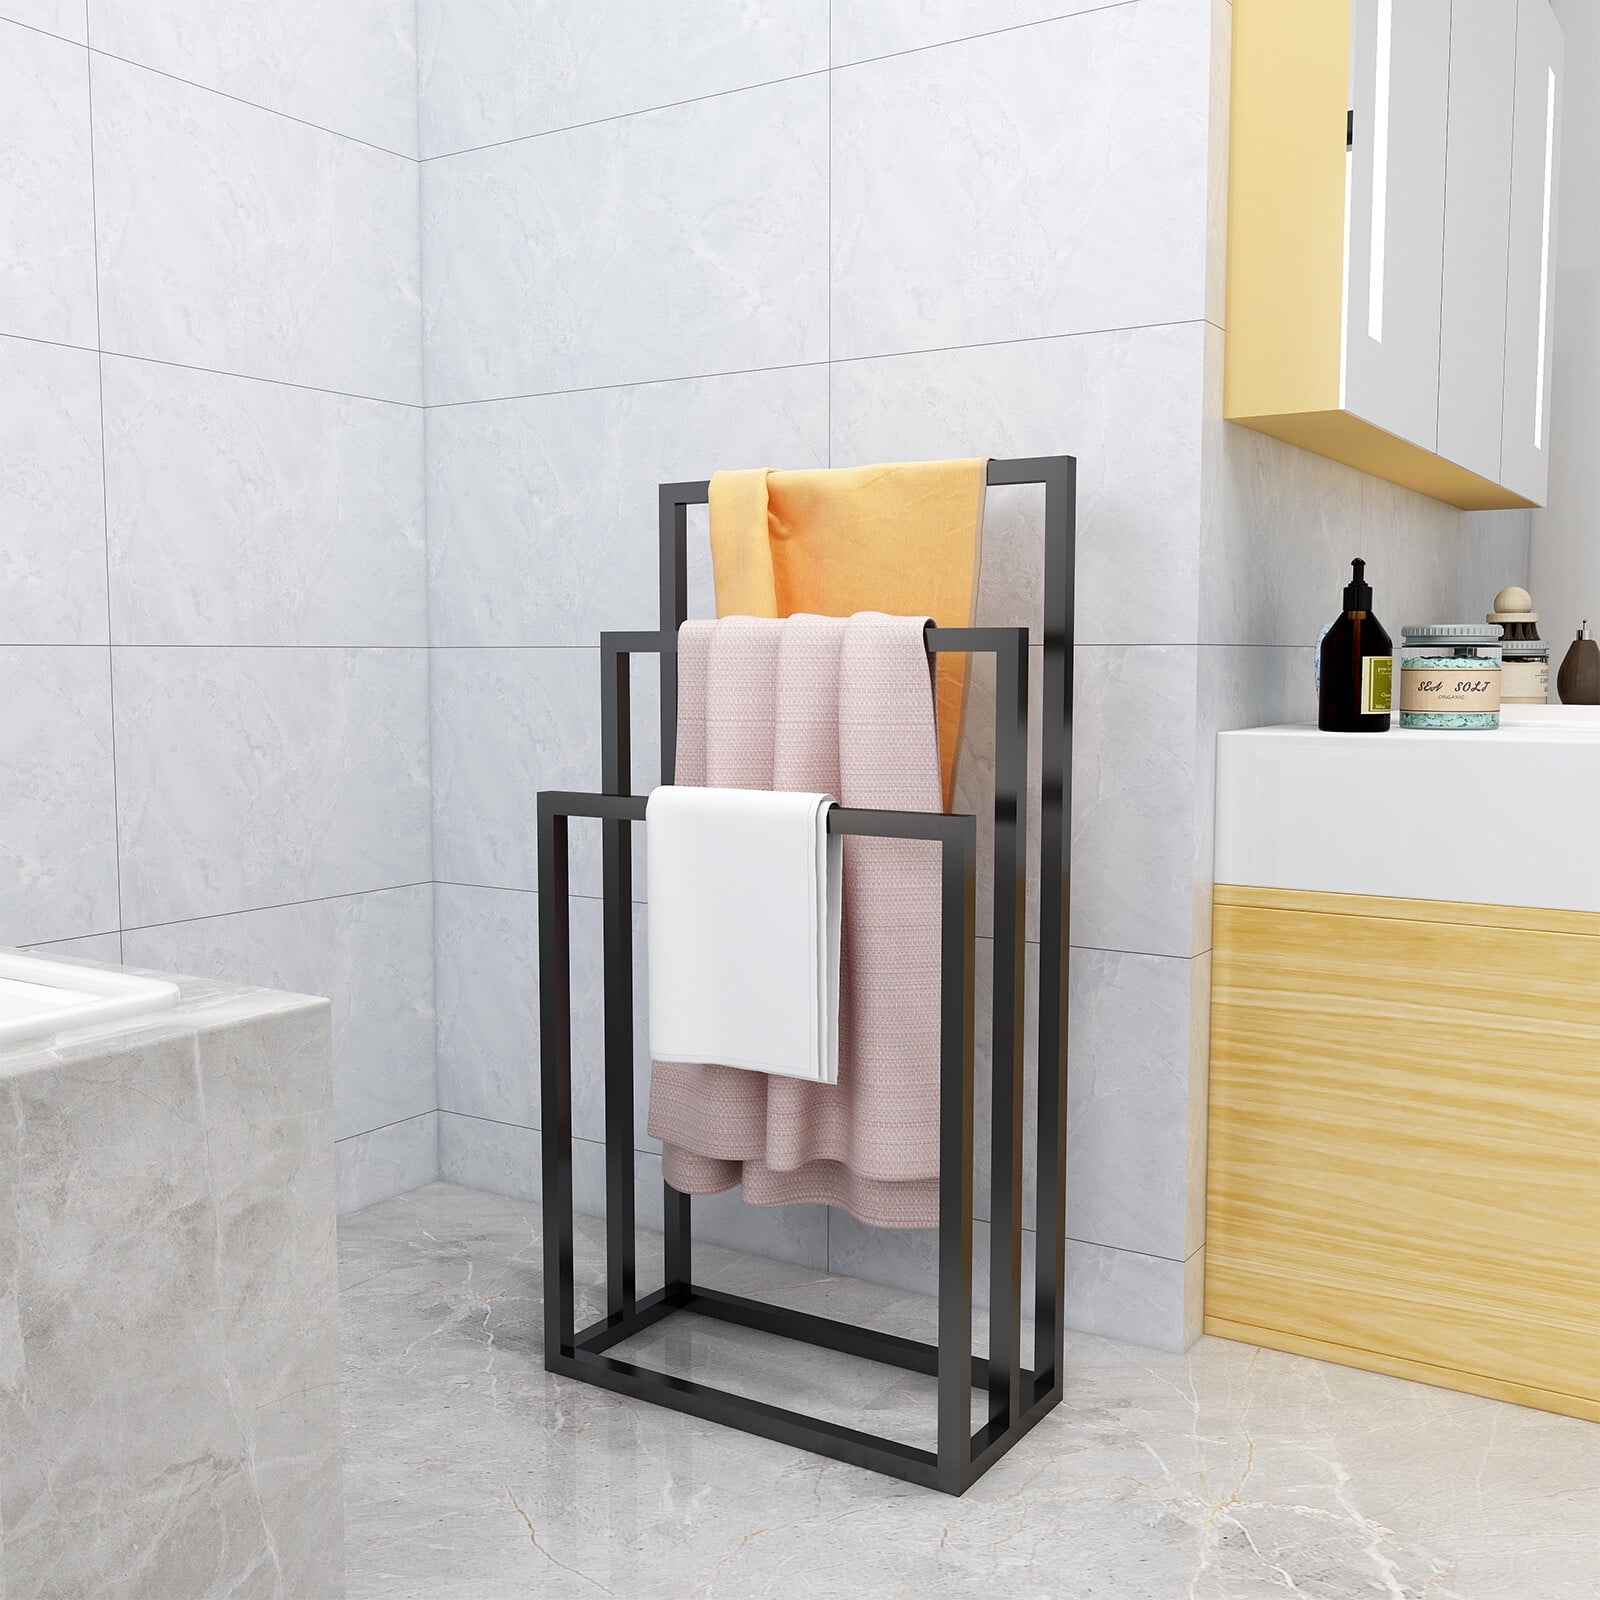 Graphite UK DI mDesign Wall Mounted Towel Storage Rack Perfect for Bathrooms 